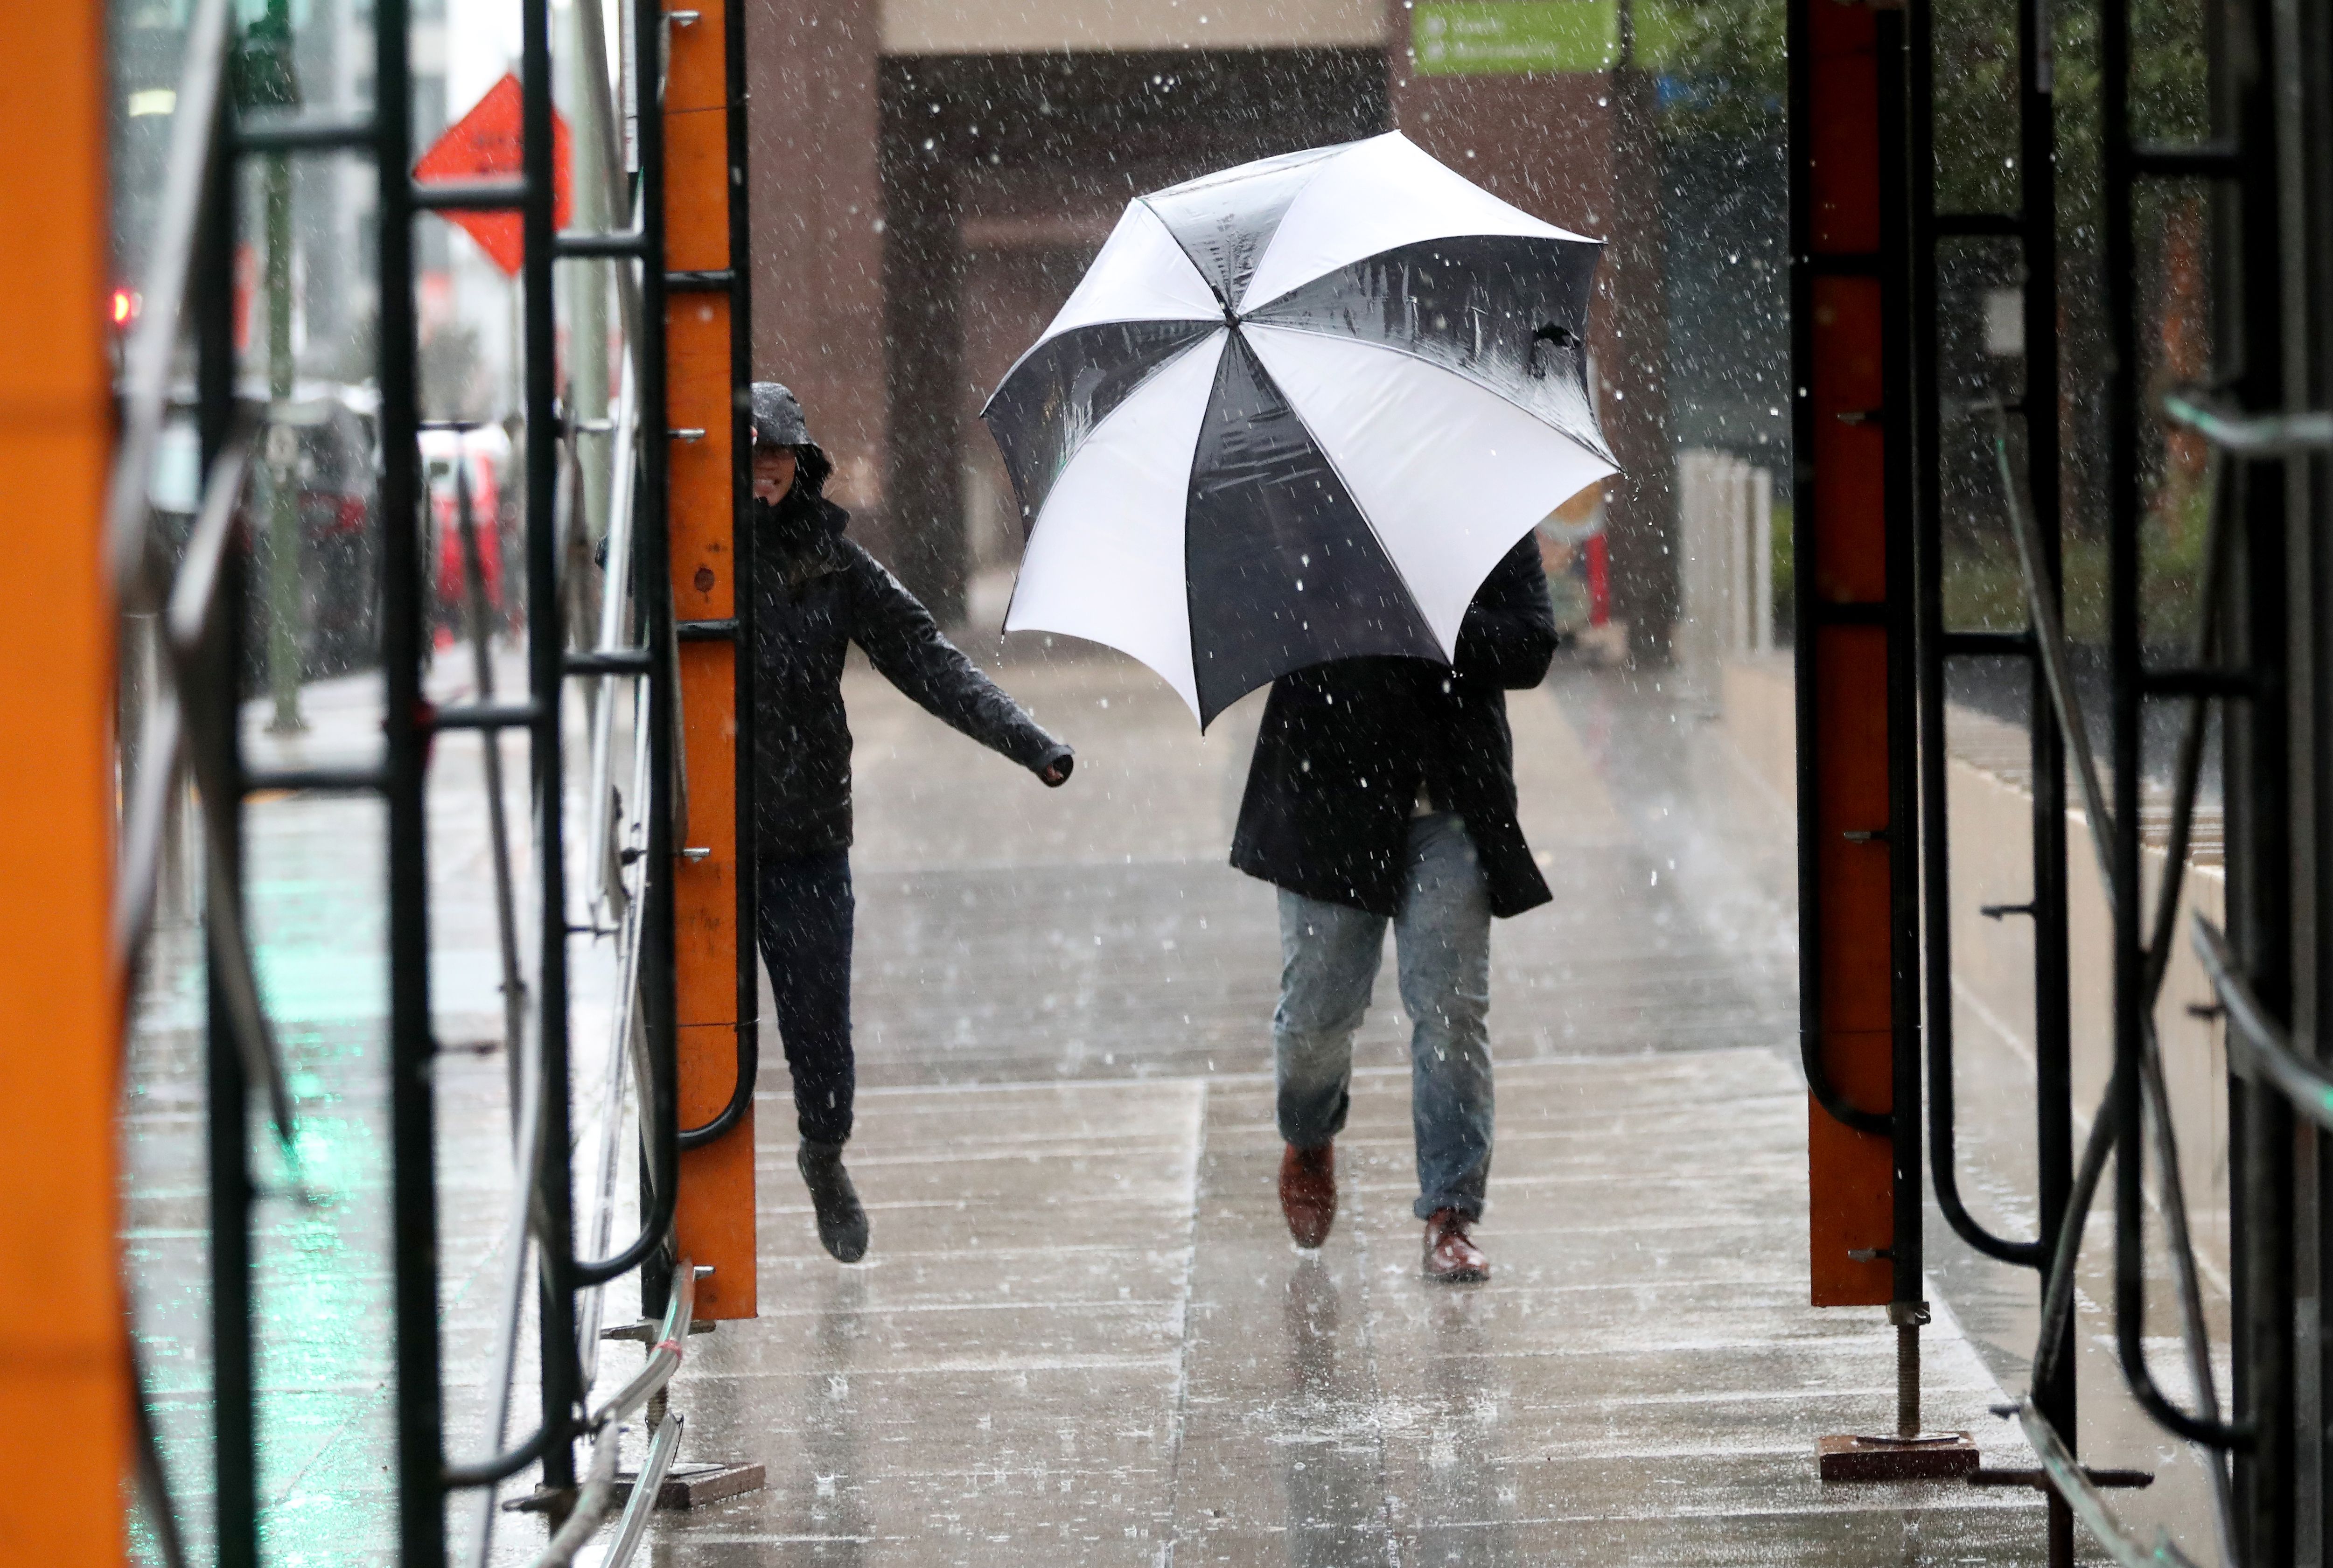  People fight the wind and rain as they walk along 12th Street near Broadway in Oakland, Calif.